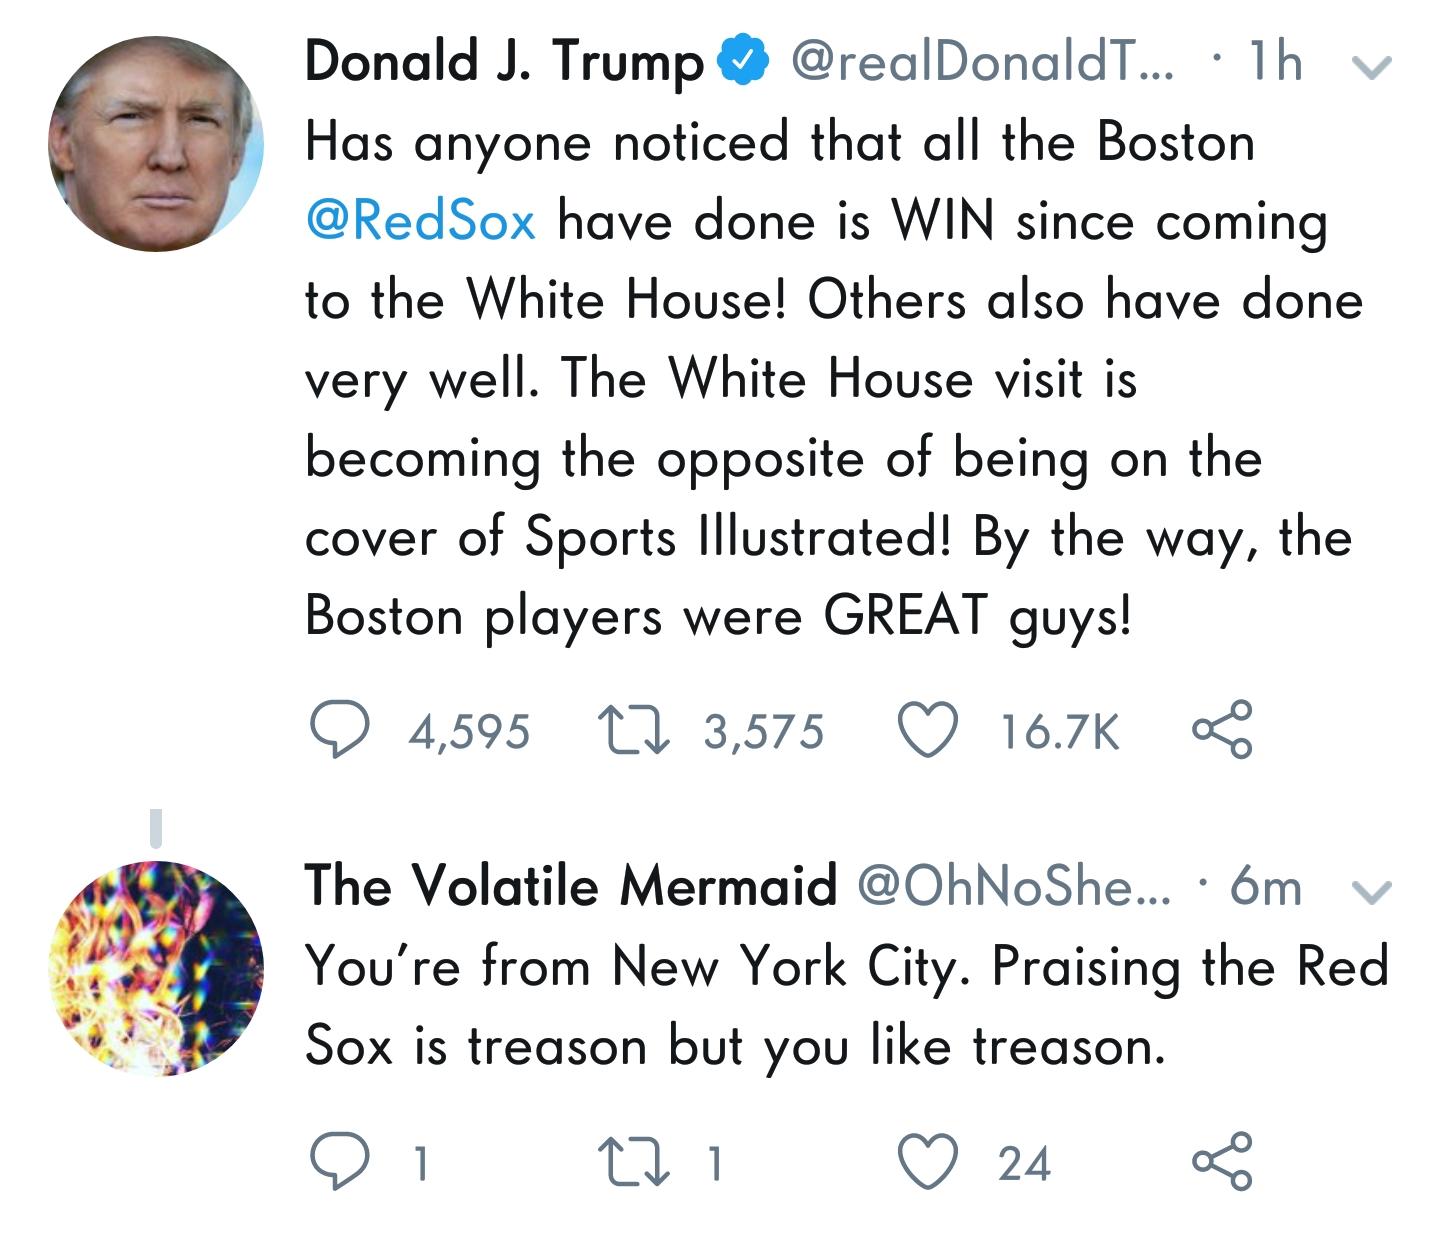 point - Donald J. Trump ... 1h v Has anyone noticed that all the Boston have done is Win since coming to the White House! Others also have done very well. The White House visit is becoming the opposite of being on the cover of Sports Illustrated! By the w